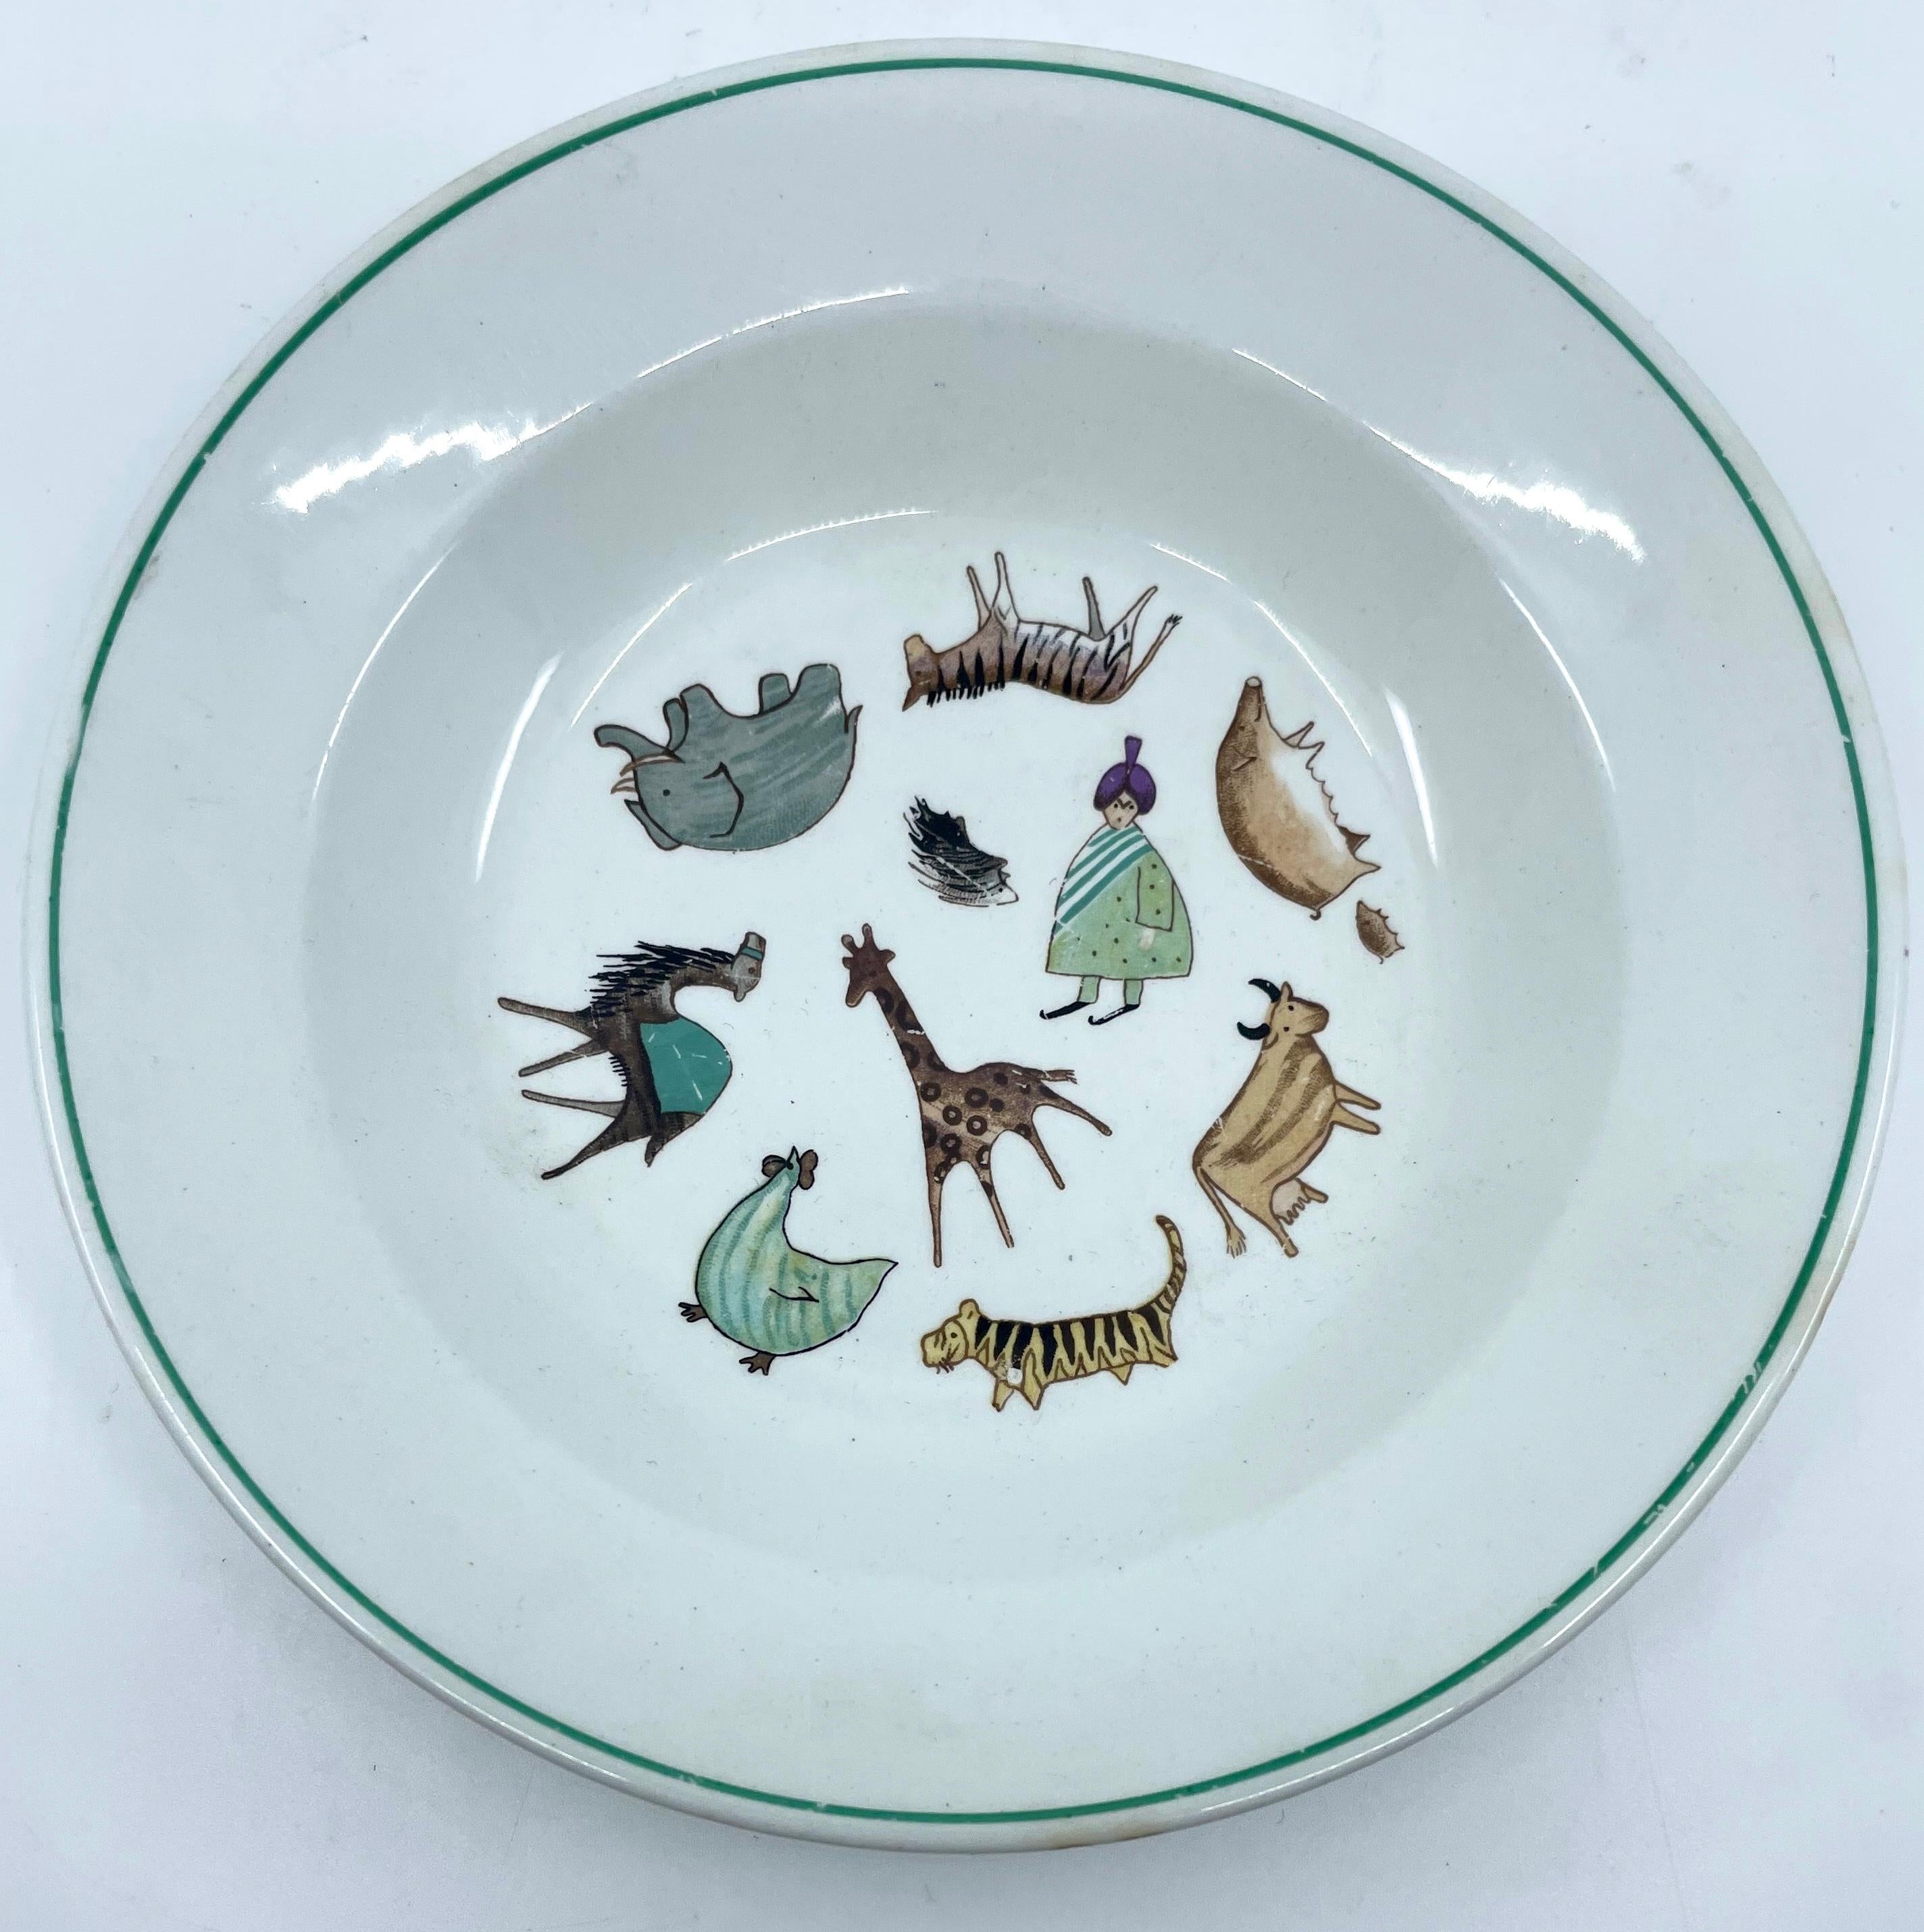 Animal Parade Child's Plate and Bowl Set In Good Condition For Sale In New York, NY